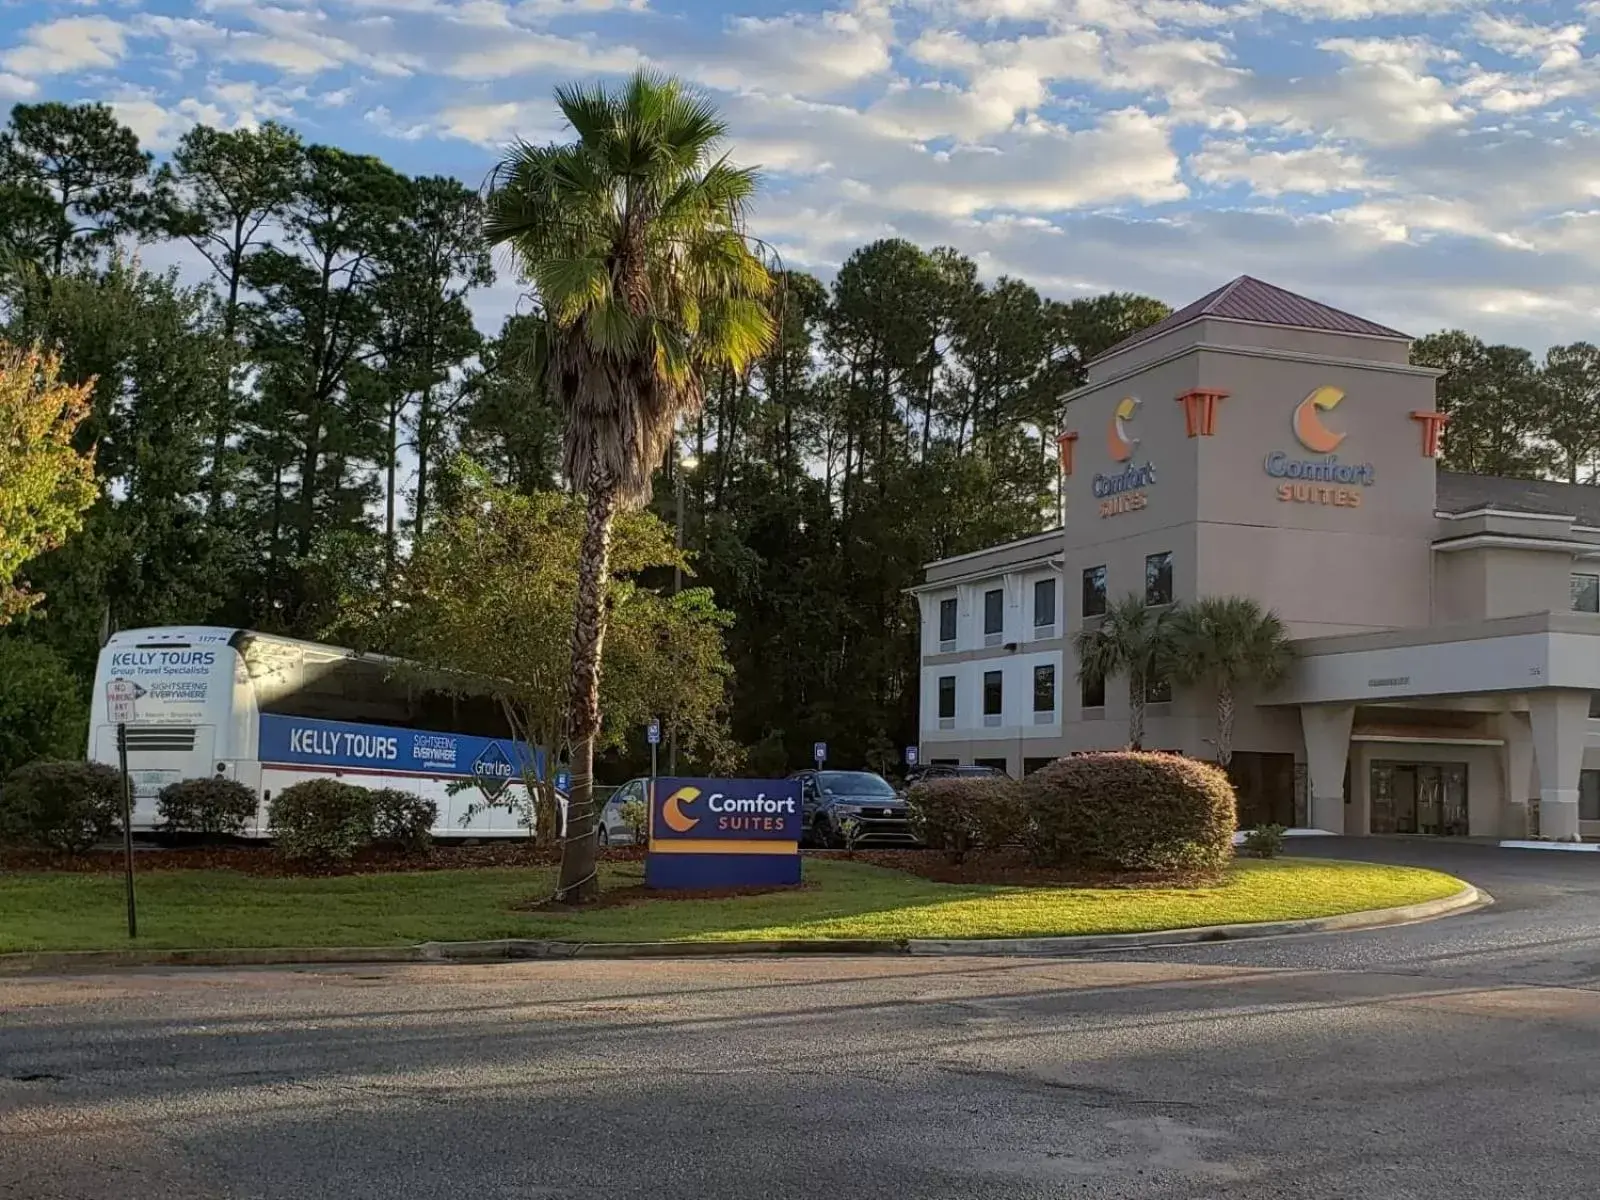 Property Building in Comfort Suites by Choice Hotels, Kingsland, I-95, Kings Bay Naval Base